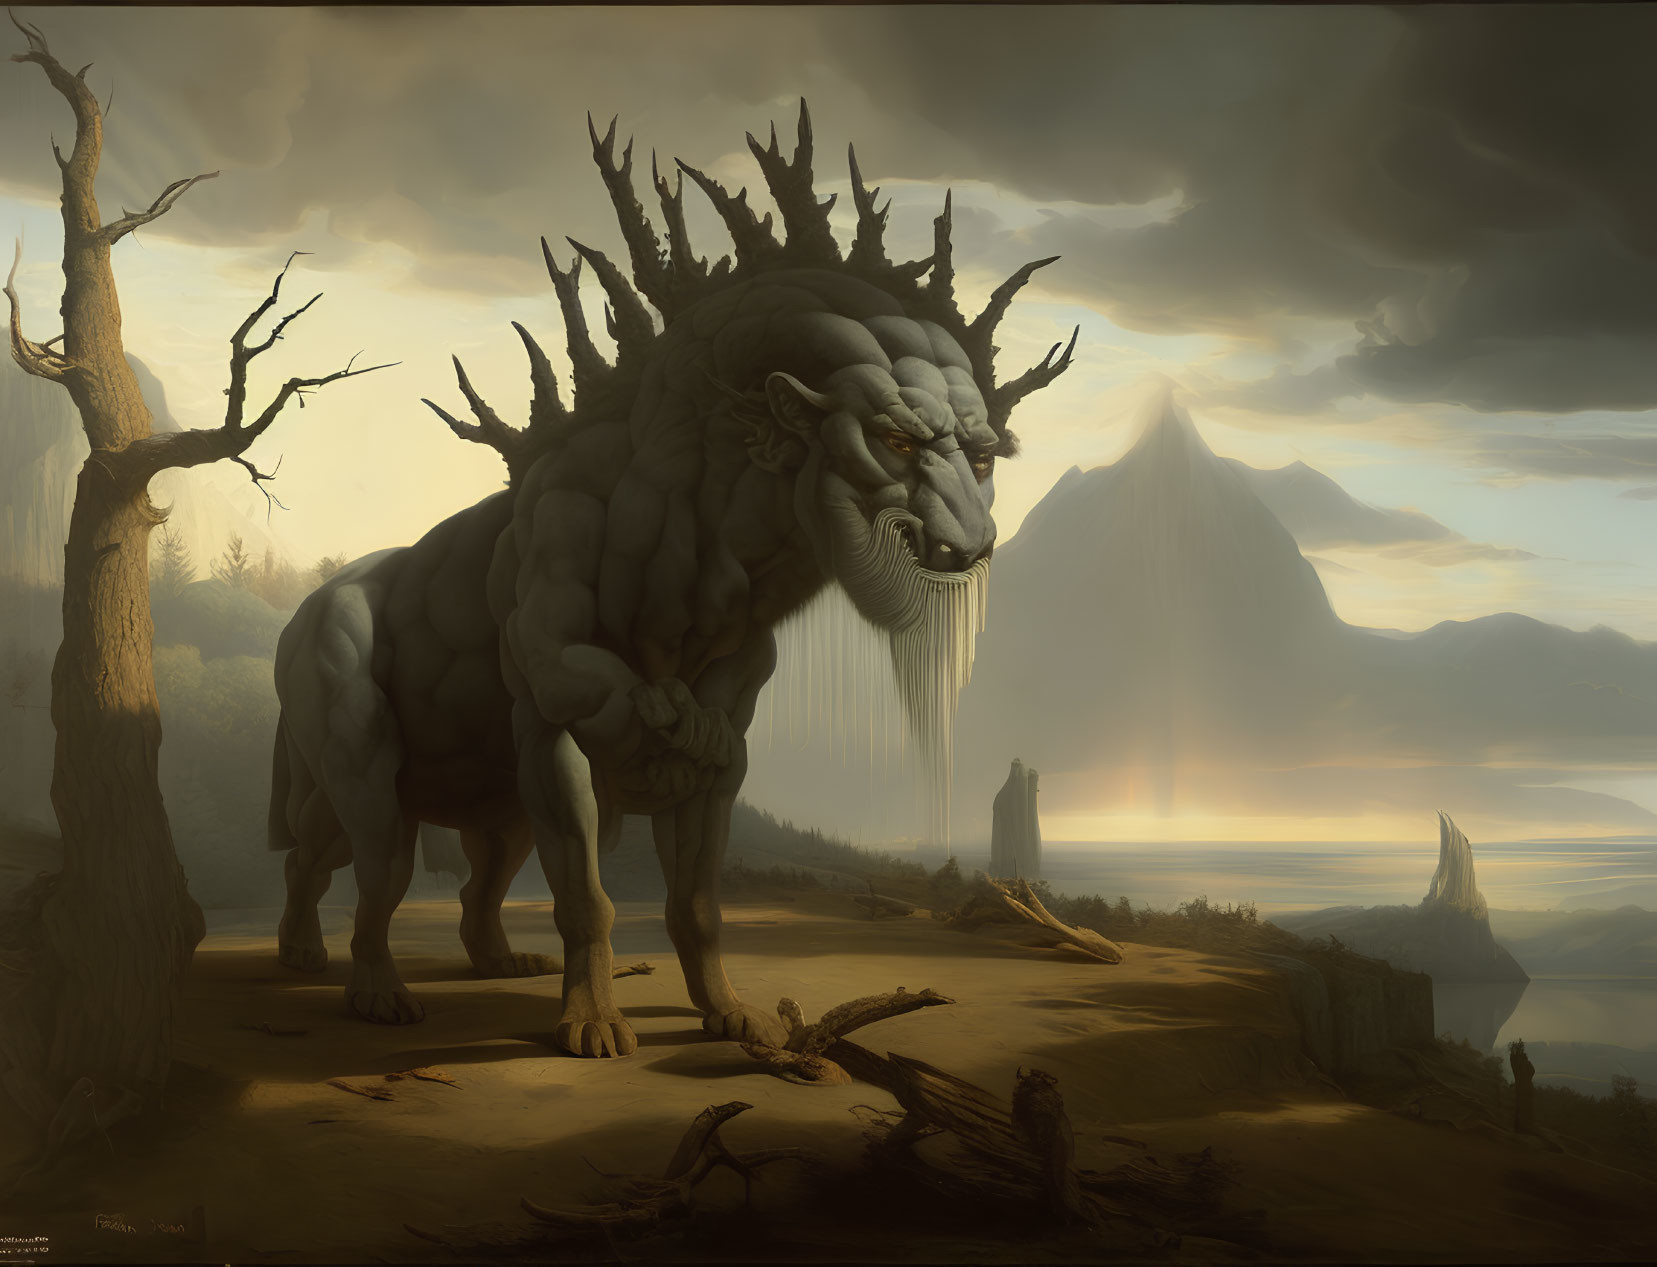 Mythical lion-like creature with horned mane in dramatic landscape